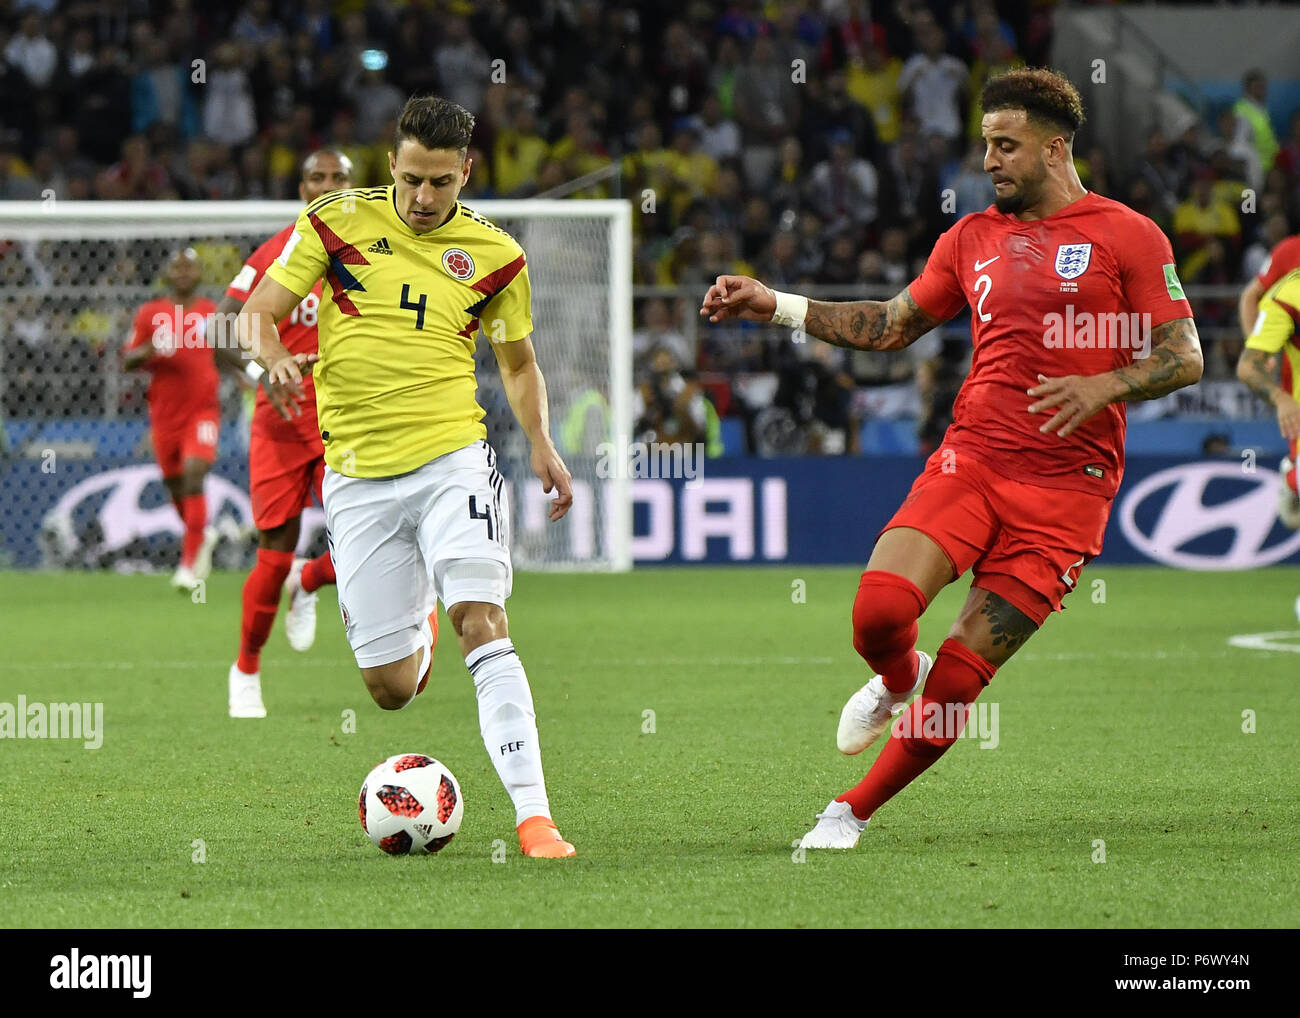 Moscow, Russia. 3rd July, 2018. Kyle Walker (R) of England vies with Santiago Arias of Colombia during the 2018 FIFA World Cup round of 16 match between England and Colombia in Moscow, Russia, July 3, 2018. Credit: He Canling/Xinhua/Alamy Live News Stock Photo